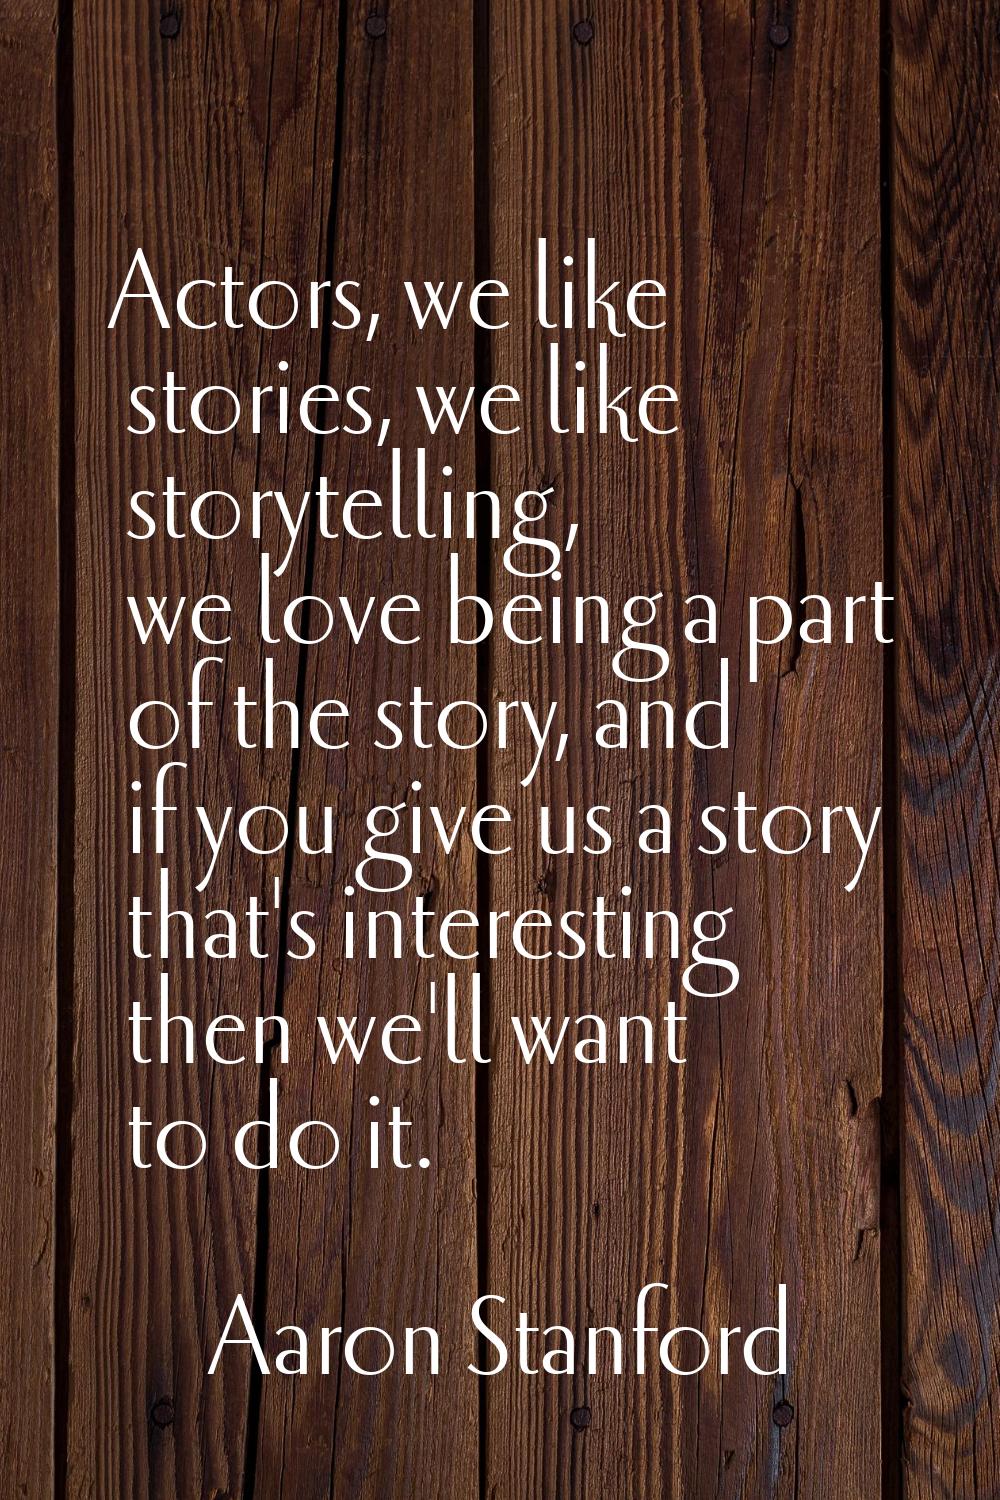 Actors, we like stories, we like storytelling, we love being a part of the story, and if you give u